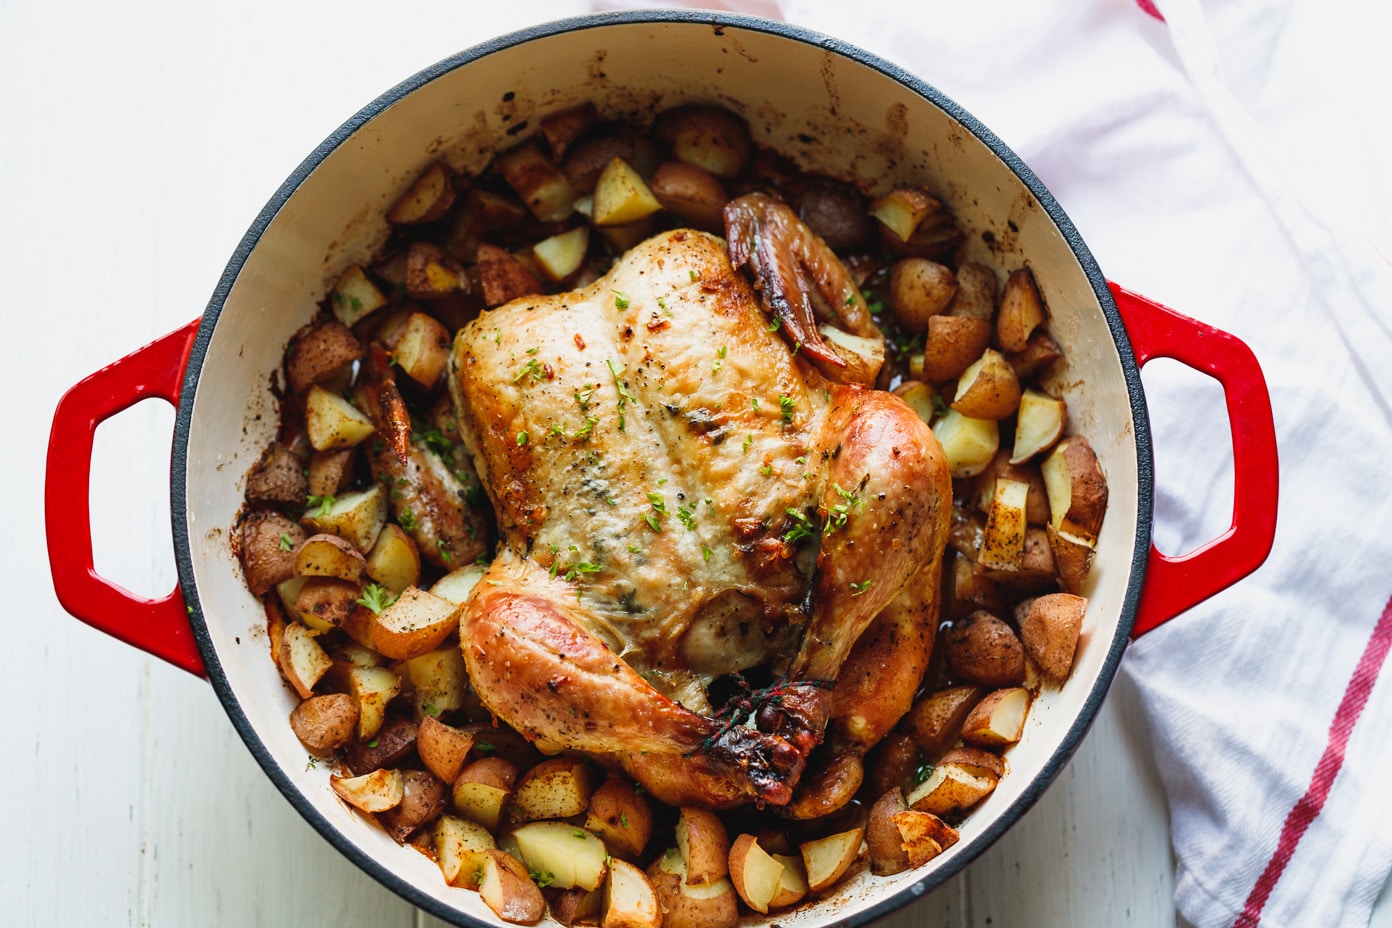 how-to-roast-a-chicken-and-potatoes-bake-or-broil